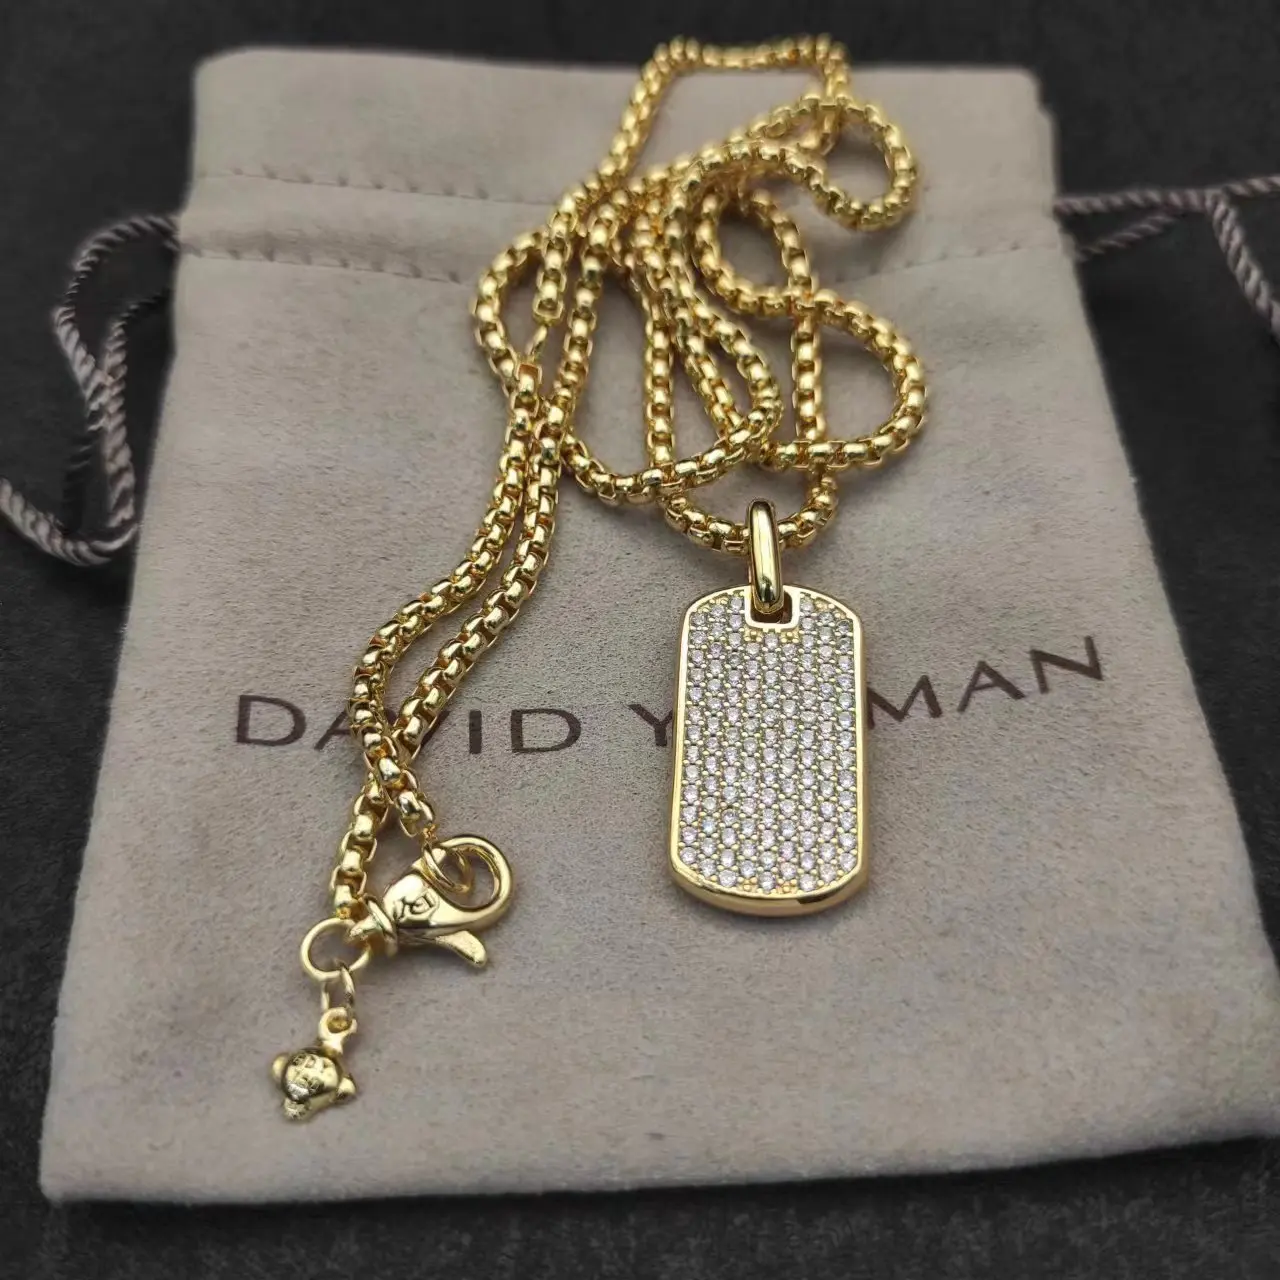 

YS David Yurman Pendant Streamlined Label,White CZ Silver Plated 18K Gold Cable Cross Necklace, Combination Bead Chain